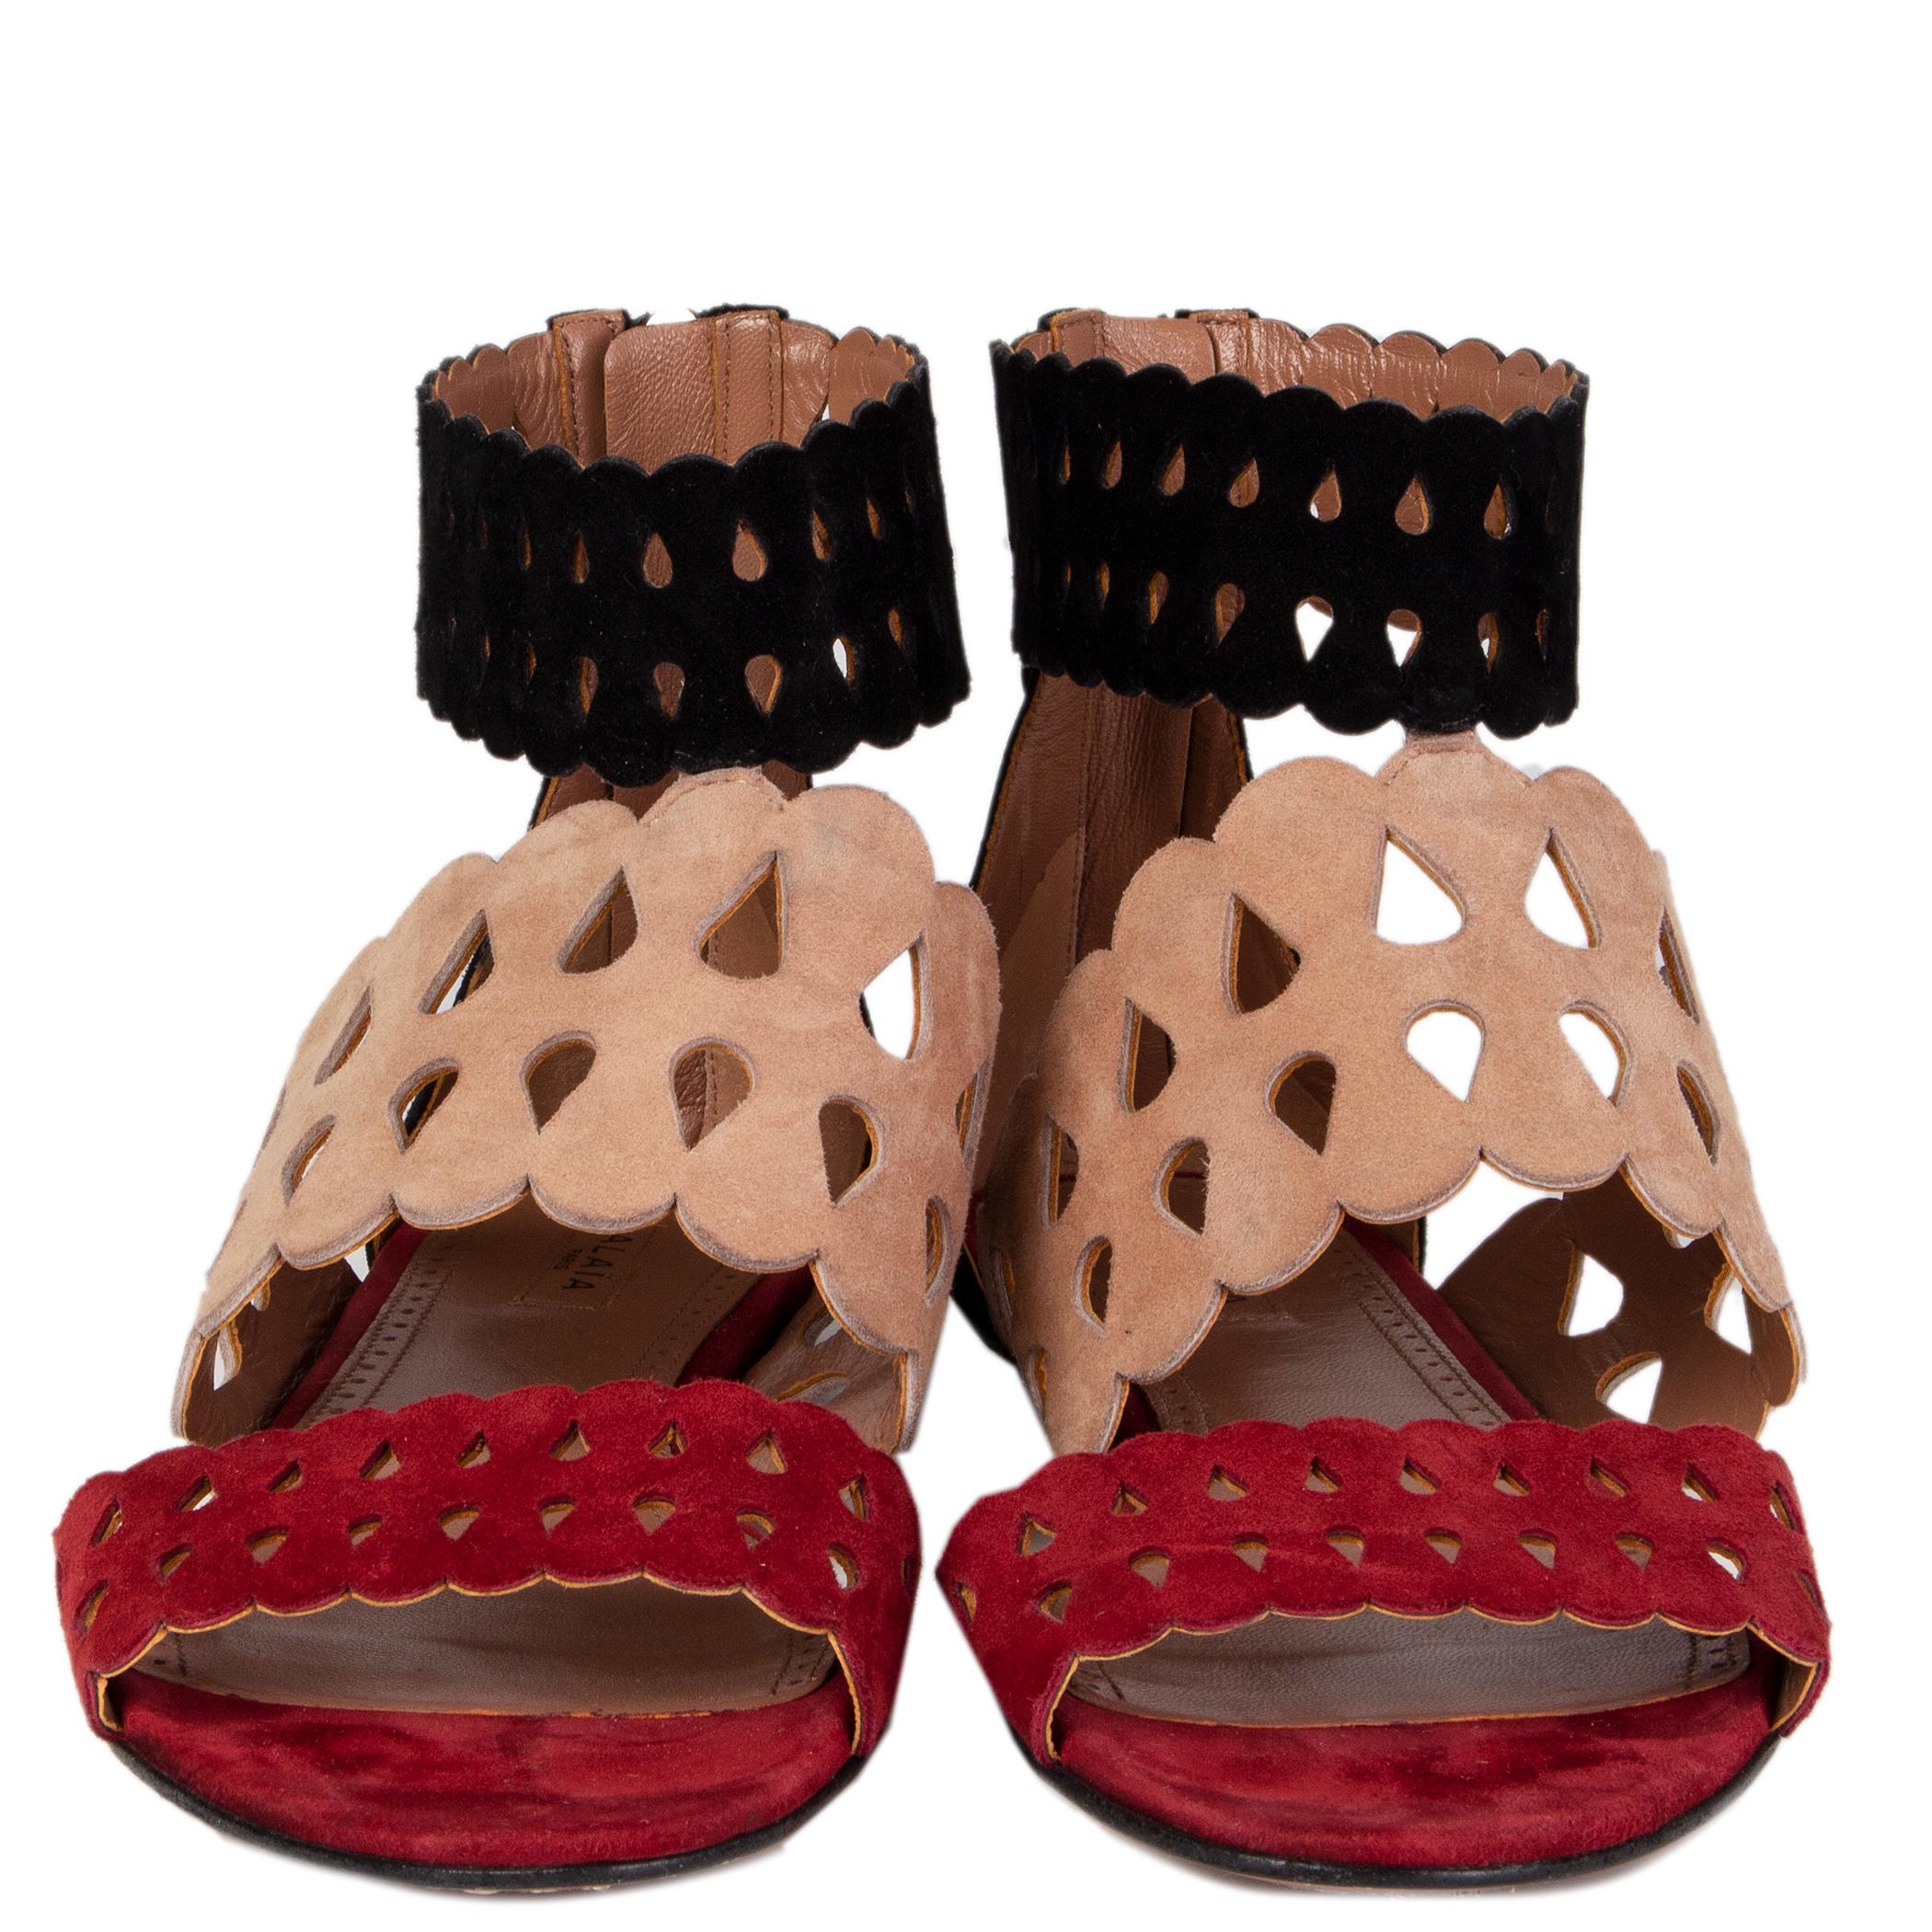 100% authentic Alaïa flat ankle-strap sandals in black, nude and burgundy suede. Open with zipper on the back of the heel. Have been worn inside and are in virtually new condition.

Measurements
Imprinted Size	37
Shoe Size	37
Inside Sole	24.5cm